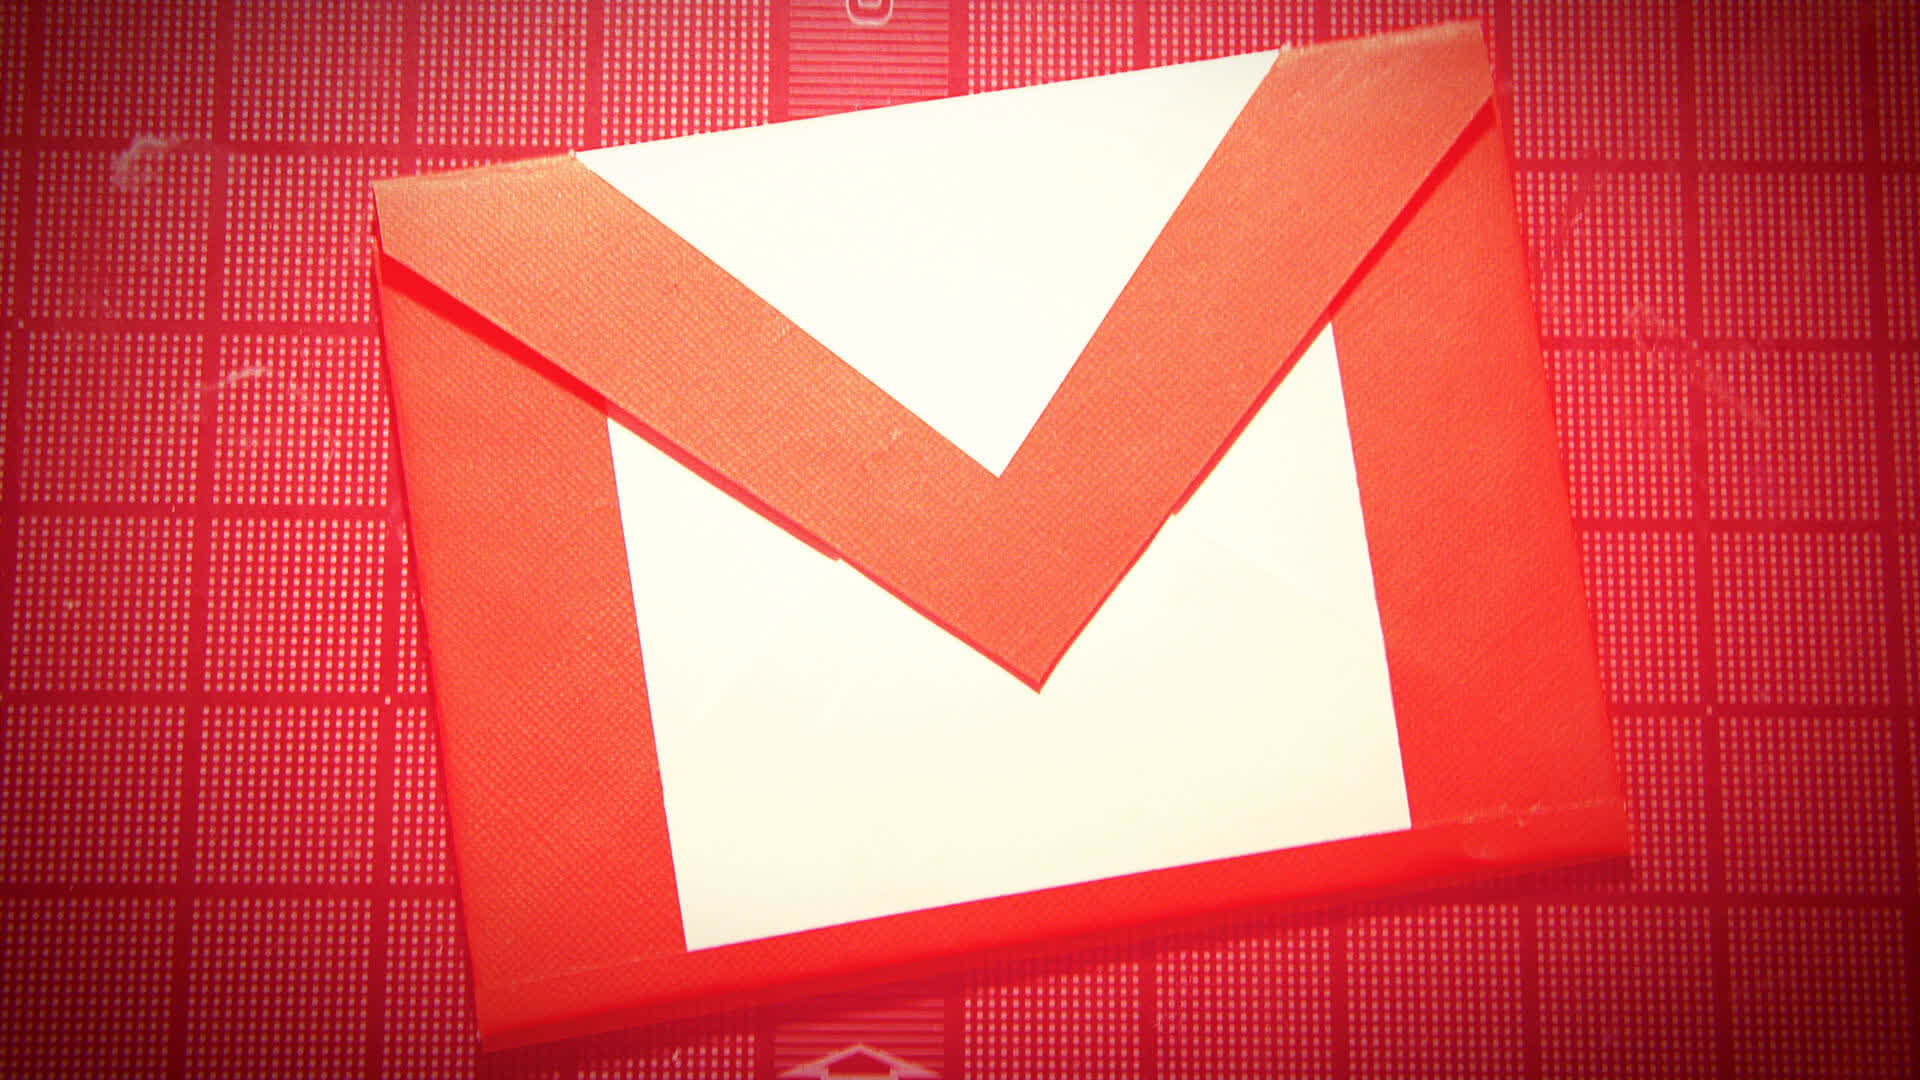 Google is increasing the number of ads in Gmail, showing them in the middle of inboxes